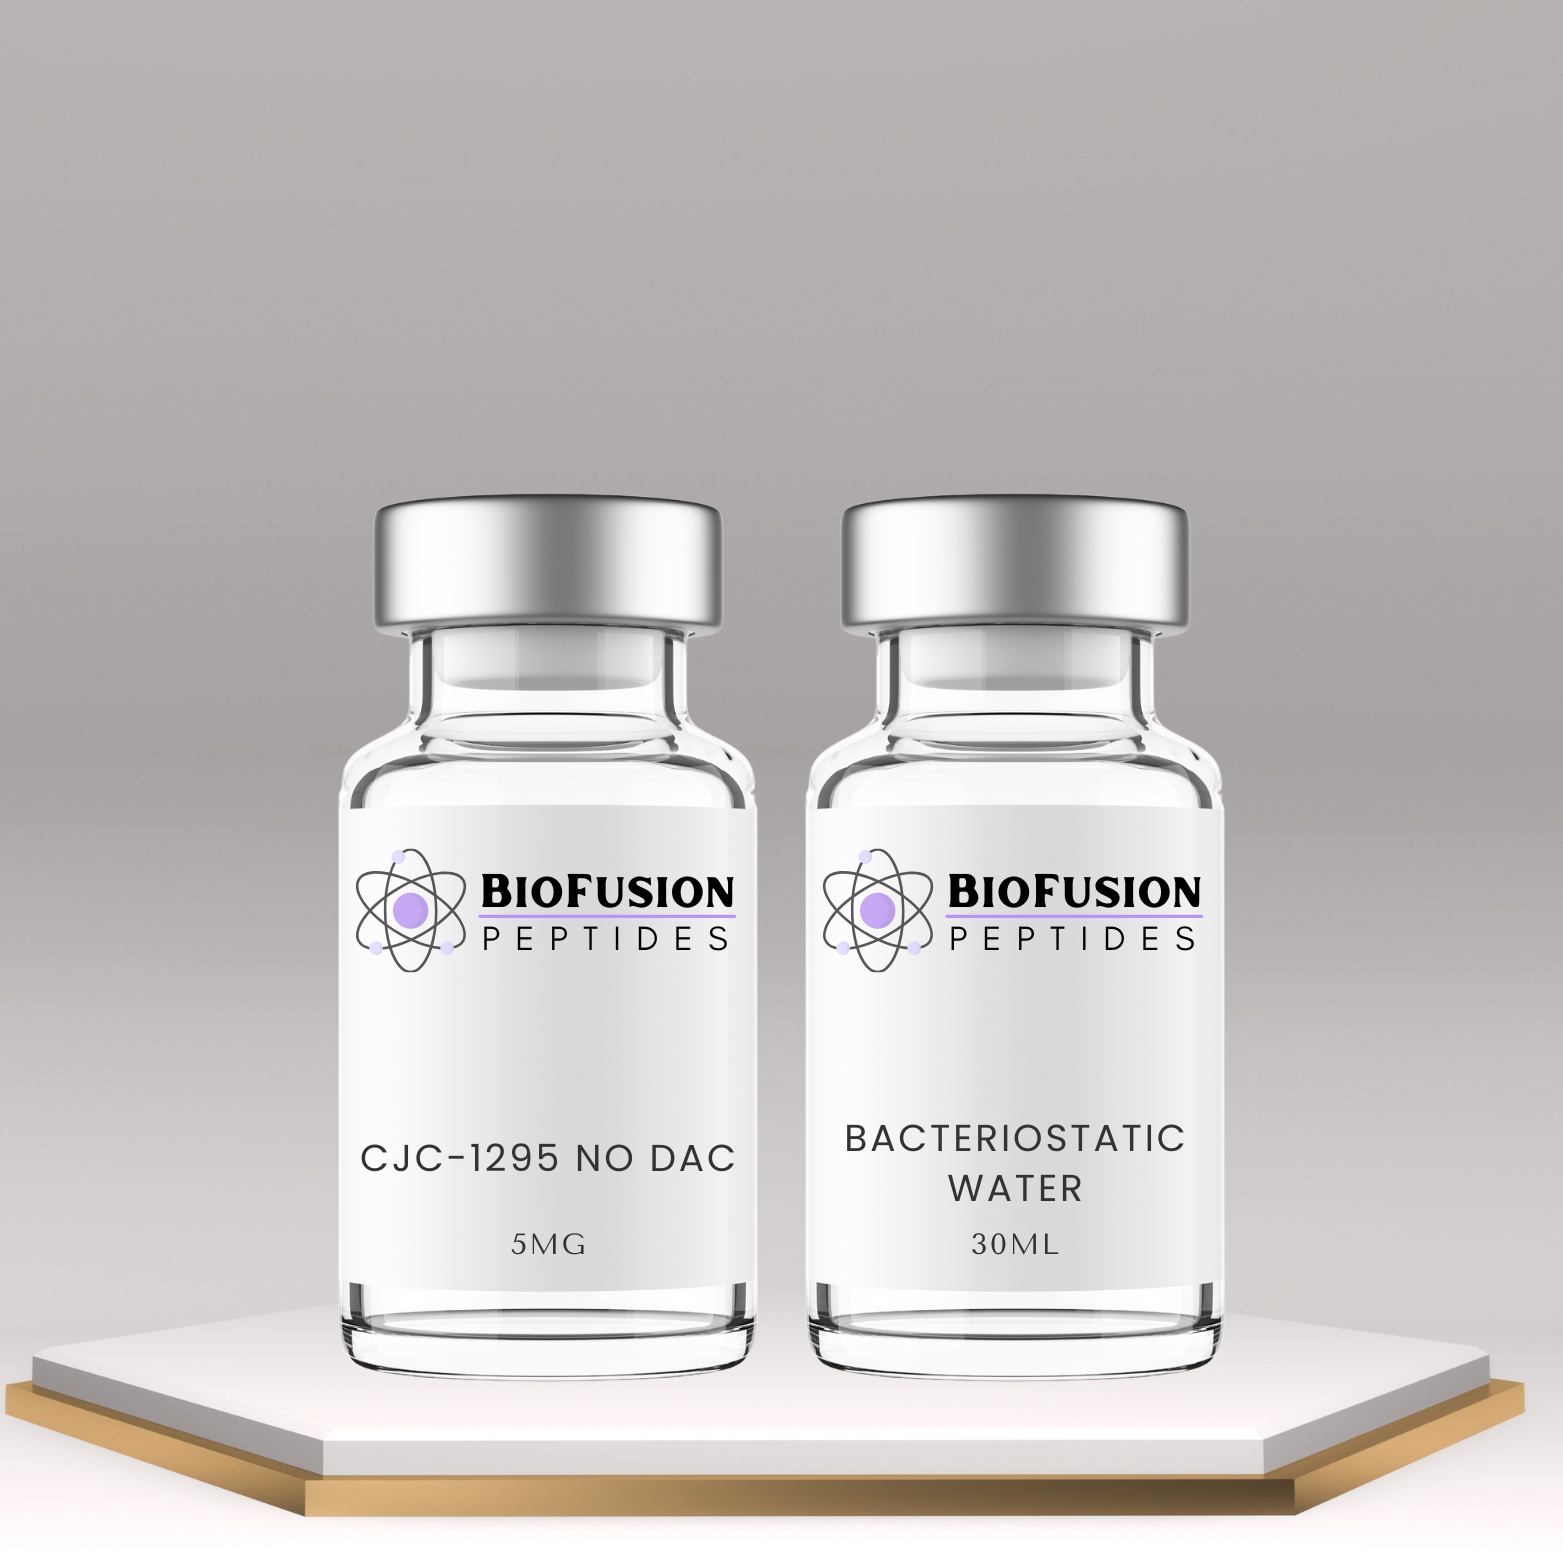 BioFusion Peptides CJC-1295 No DAC kit with bacteriostatic water